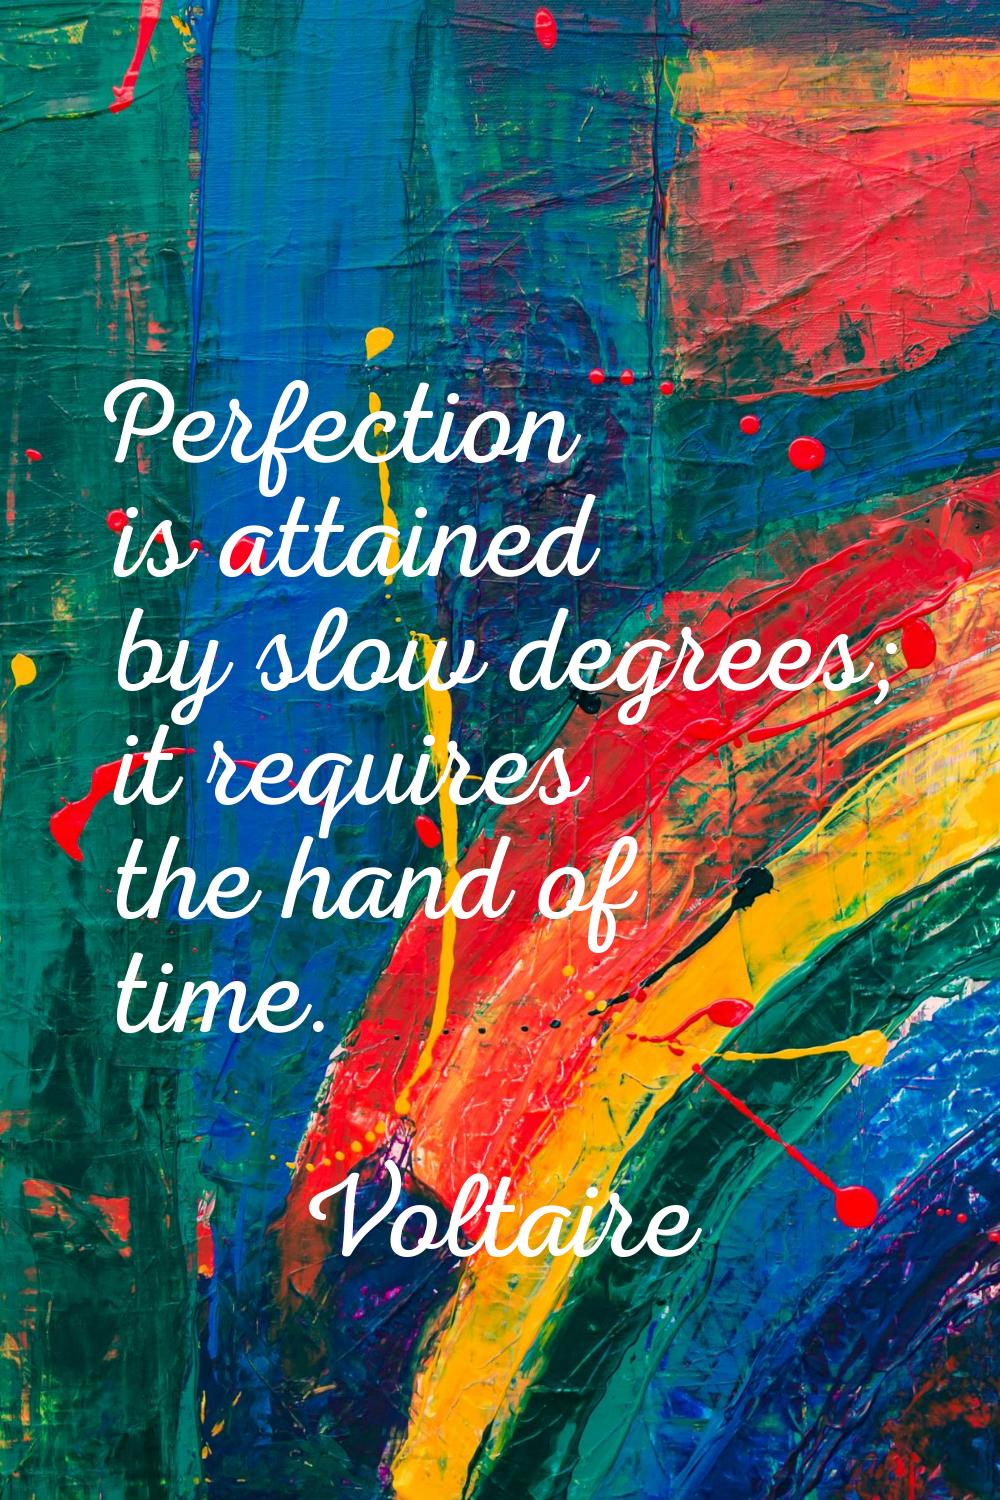 Perfection is attained by slow degrees; it requires the hand of time.